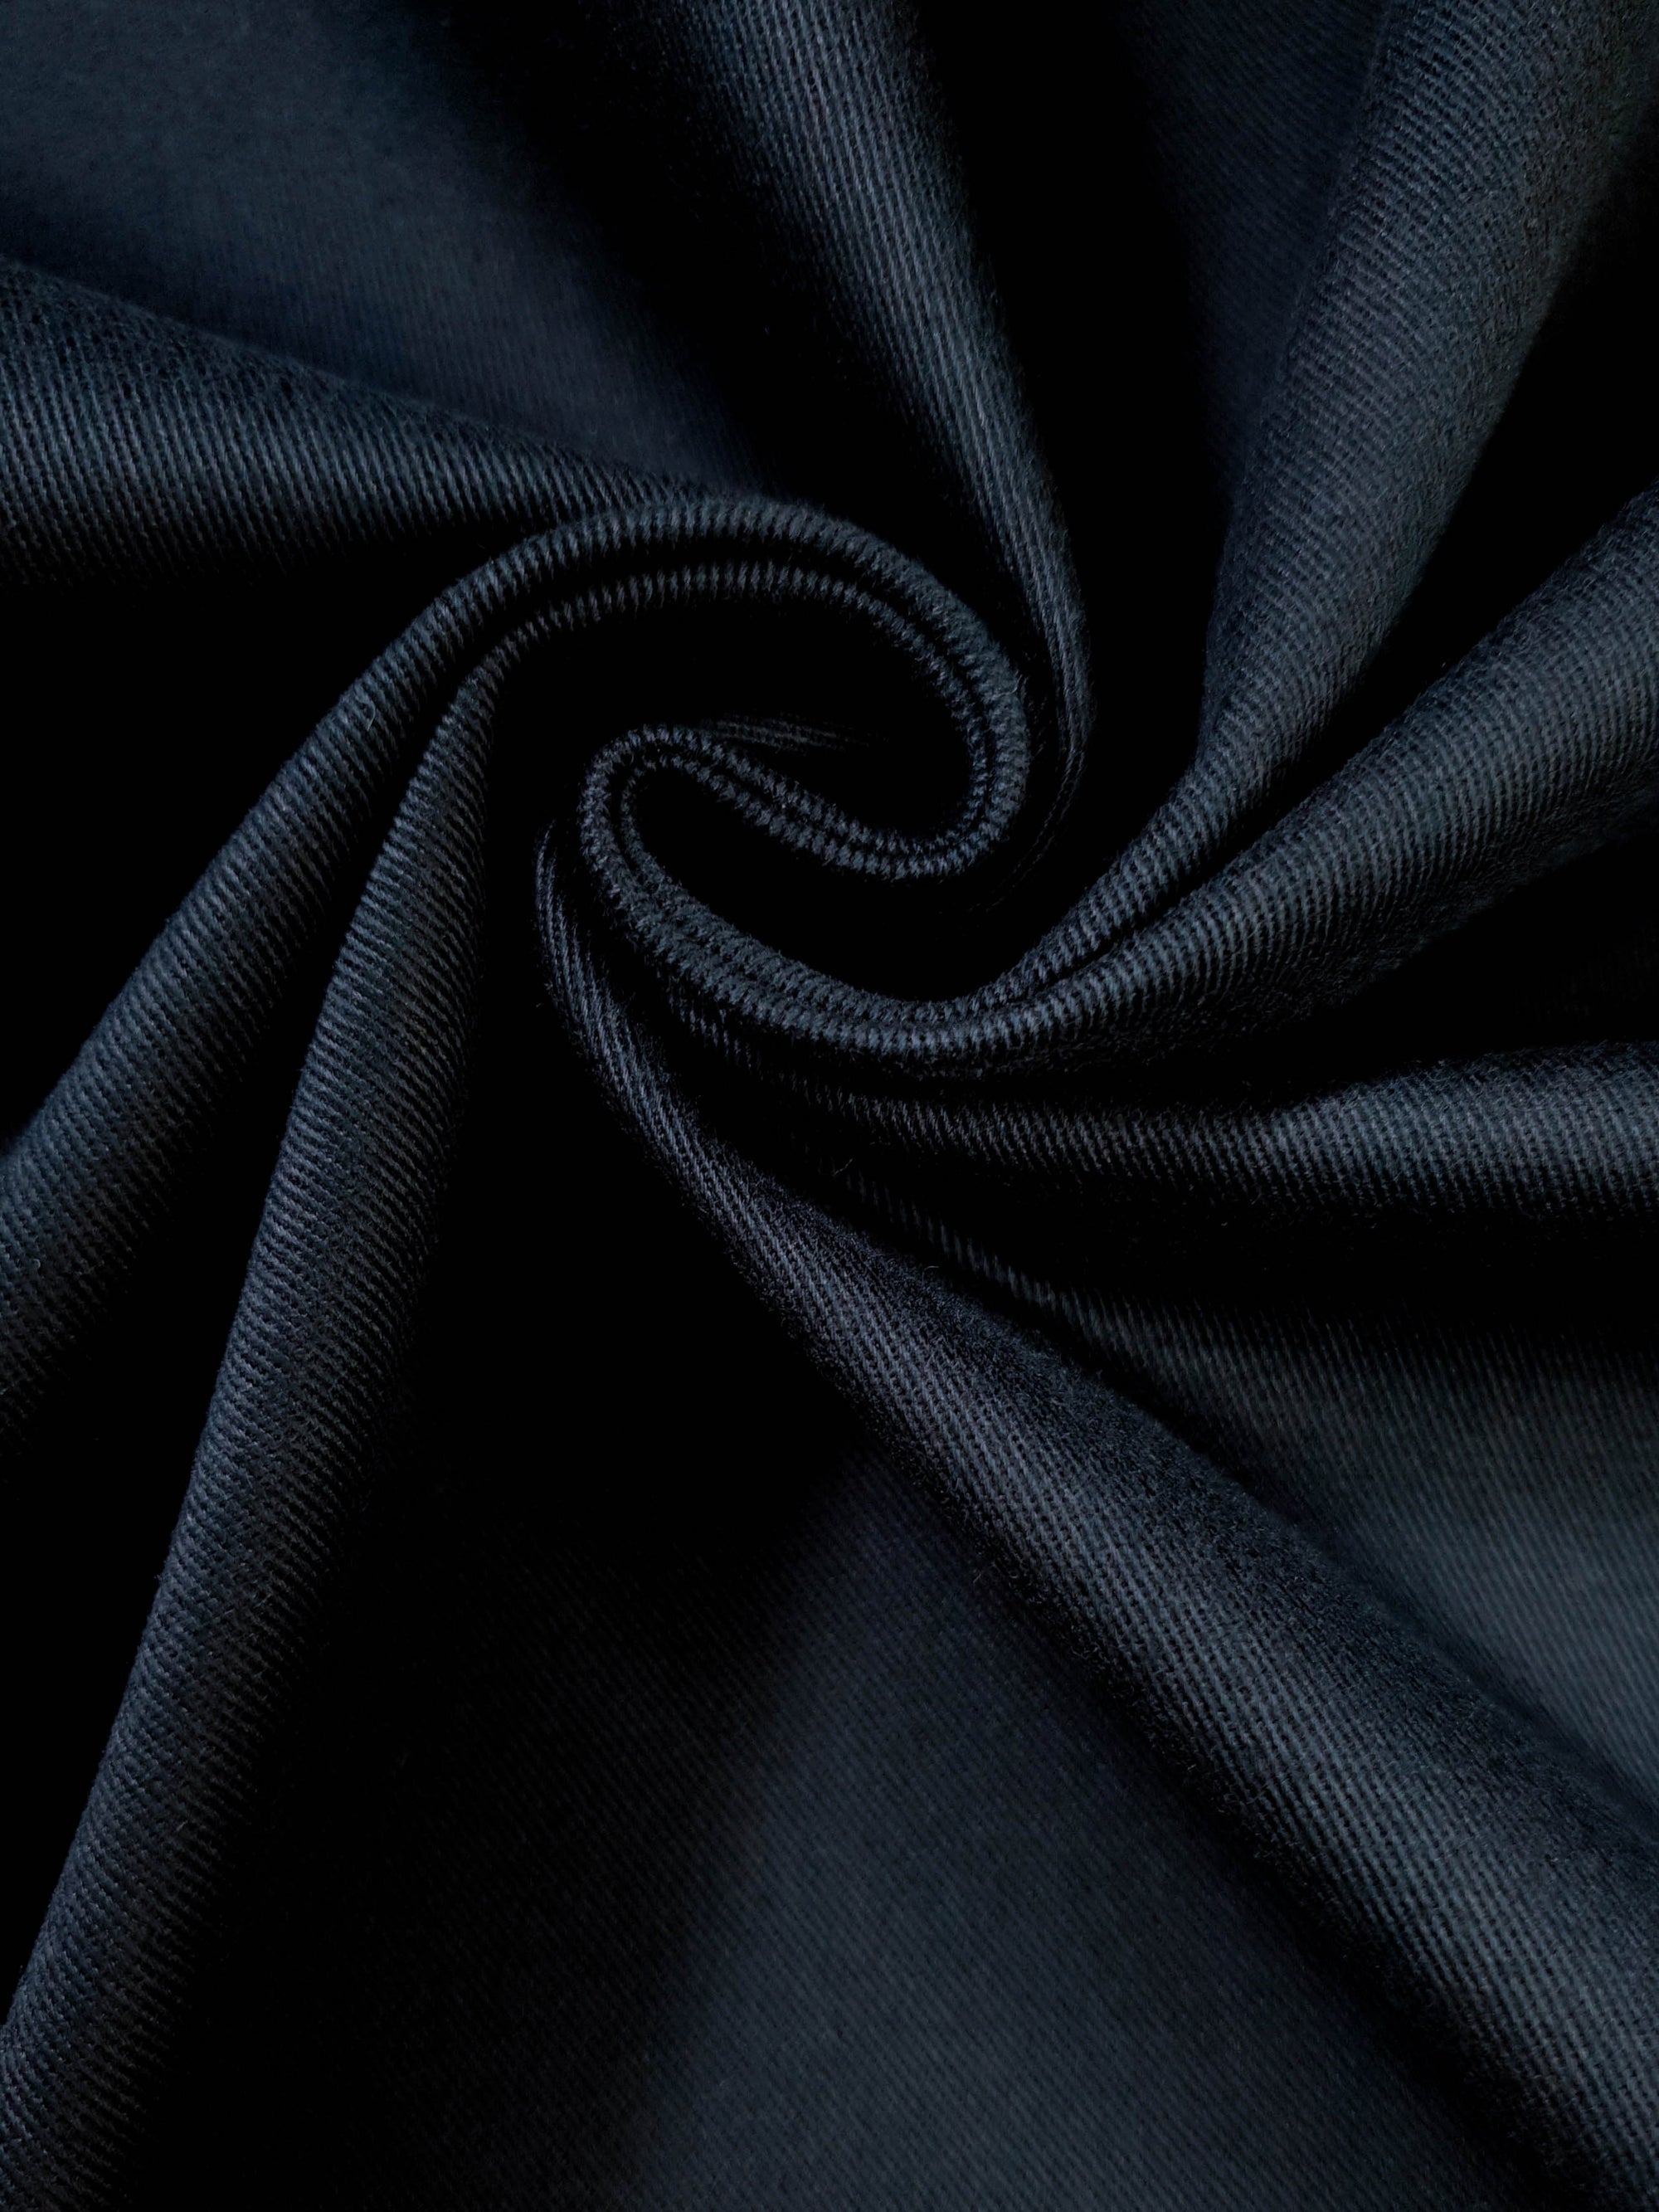 HUBERROSS Dark Navy Color Brushed Cotton with Stretch  97% Cotton 3% Lycra Cloth Made in Italy